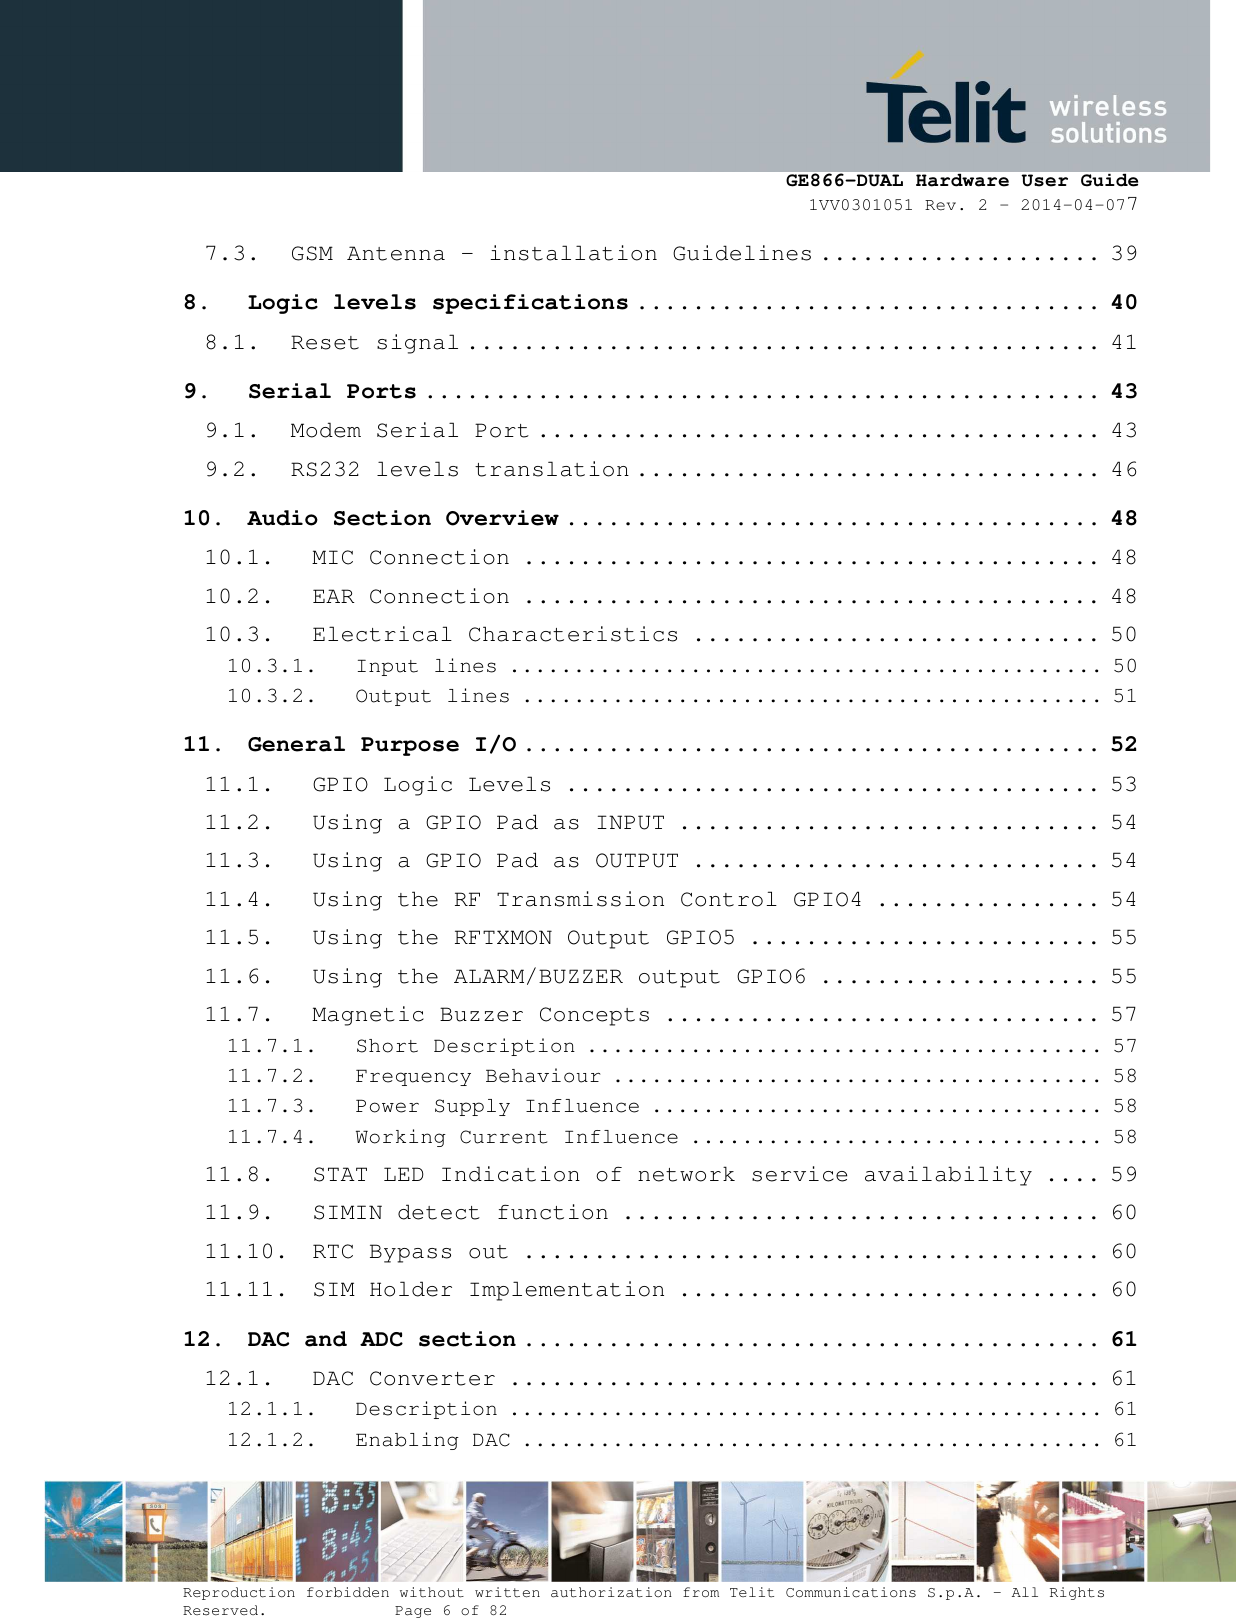      GE866-DUAL Hardware User Guide 1VV0301051 Rev. 2 – 2014-04-077  Reproduction forbidden without written authorization from Telit Communications S.p.A. - All Rights Reserved.    Page 6 of 82 Mod. 0805 2011-07 Rev.2 7.3. GSM Antenna - installation Guidelines .................... 39 8. Logic levels specifications ................................. 40 8.1. Reset signal ............................................. 41 9. Serial Ports ................................................ 43 9.1. Modem Serial Port ........................................ 43 9.2. RS232 levels translation ................................. 46 10. Audio Section Overview ...................................... 48 10.1. MIC Connection ......................................... 48 10.2. EAR Connection ......................................... 48 10.3. Electrical Characteristics ............................. 50 10.3.1. Input lines .............................................. 50 10.3.2. Output lines ............................................. 51 11. General Purpose I/O ......................................... 52 11.1. GPIO Logic Levels ...................................... 53 11.2. Using a GPIO Pad as INPUT .............................. 54 11.3. Using a GPIO Pad as OUTPUT ............................. 54 11.4. Using the RF Transmission Control GPIO4 ................ 54 11.5. Using the RFTXMON Output GPIO5 ......................... 55 11.6. Using the ALARM/BUZZER output GPIO6 .................... 55 11.7. Magnetic Buzzer Concepts ............................... 57 11.7.1. Short Description ........................................ 57 11.7.2. Frequency Behaviour ...................................... 58 11.7.3. Power Supply Influence ................................... 58 11.7.4. Working Current Influence ................................ 58 11.8. STAT LED Indication of network service availability .... 59 11.9. SIMIN detect function .................................. 60 11.10. RTC Bypass out ......................................... 60 11.11. SIM Holder Implementation .............................. 60 12. DAC and ADC section ......................................... 61 12.1. DAC Converter .......................................... 61 12.1.1. Description .............................................. 61 12.1.2. Enabling DAC ............................................. 61 